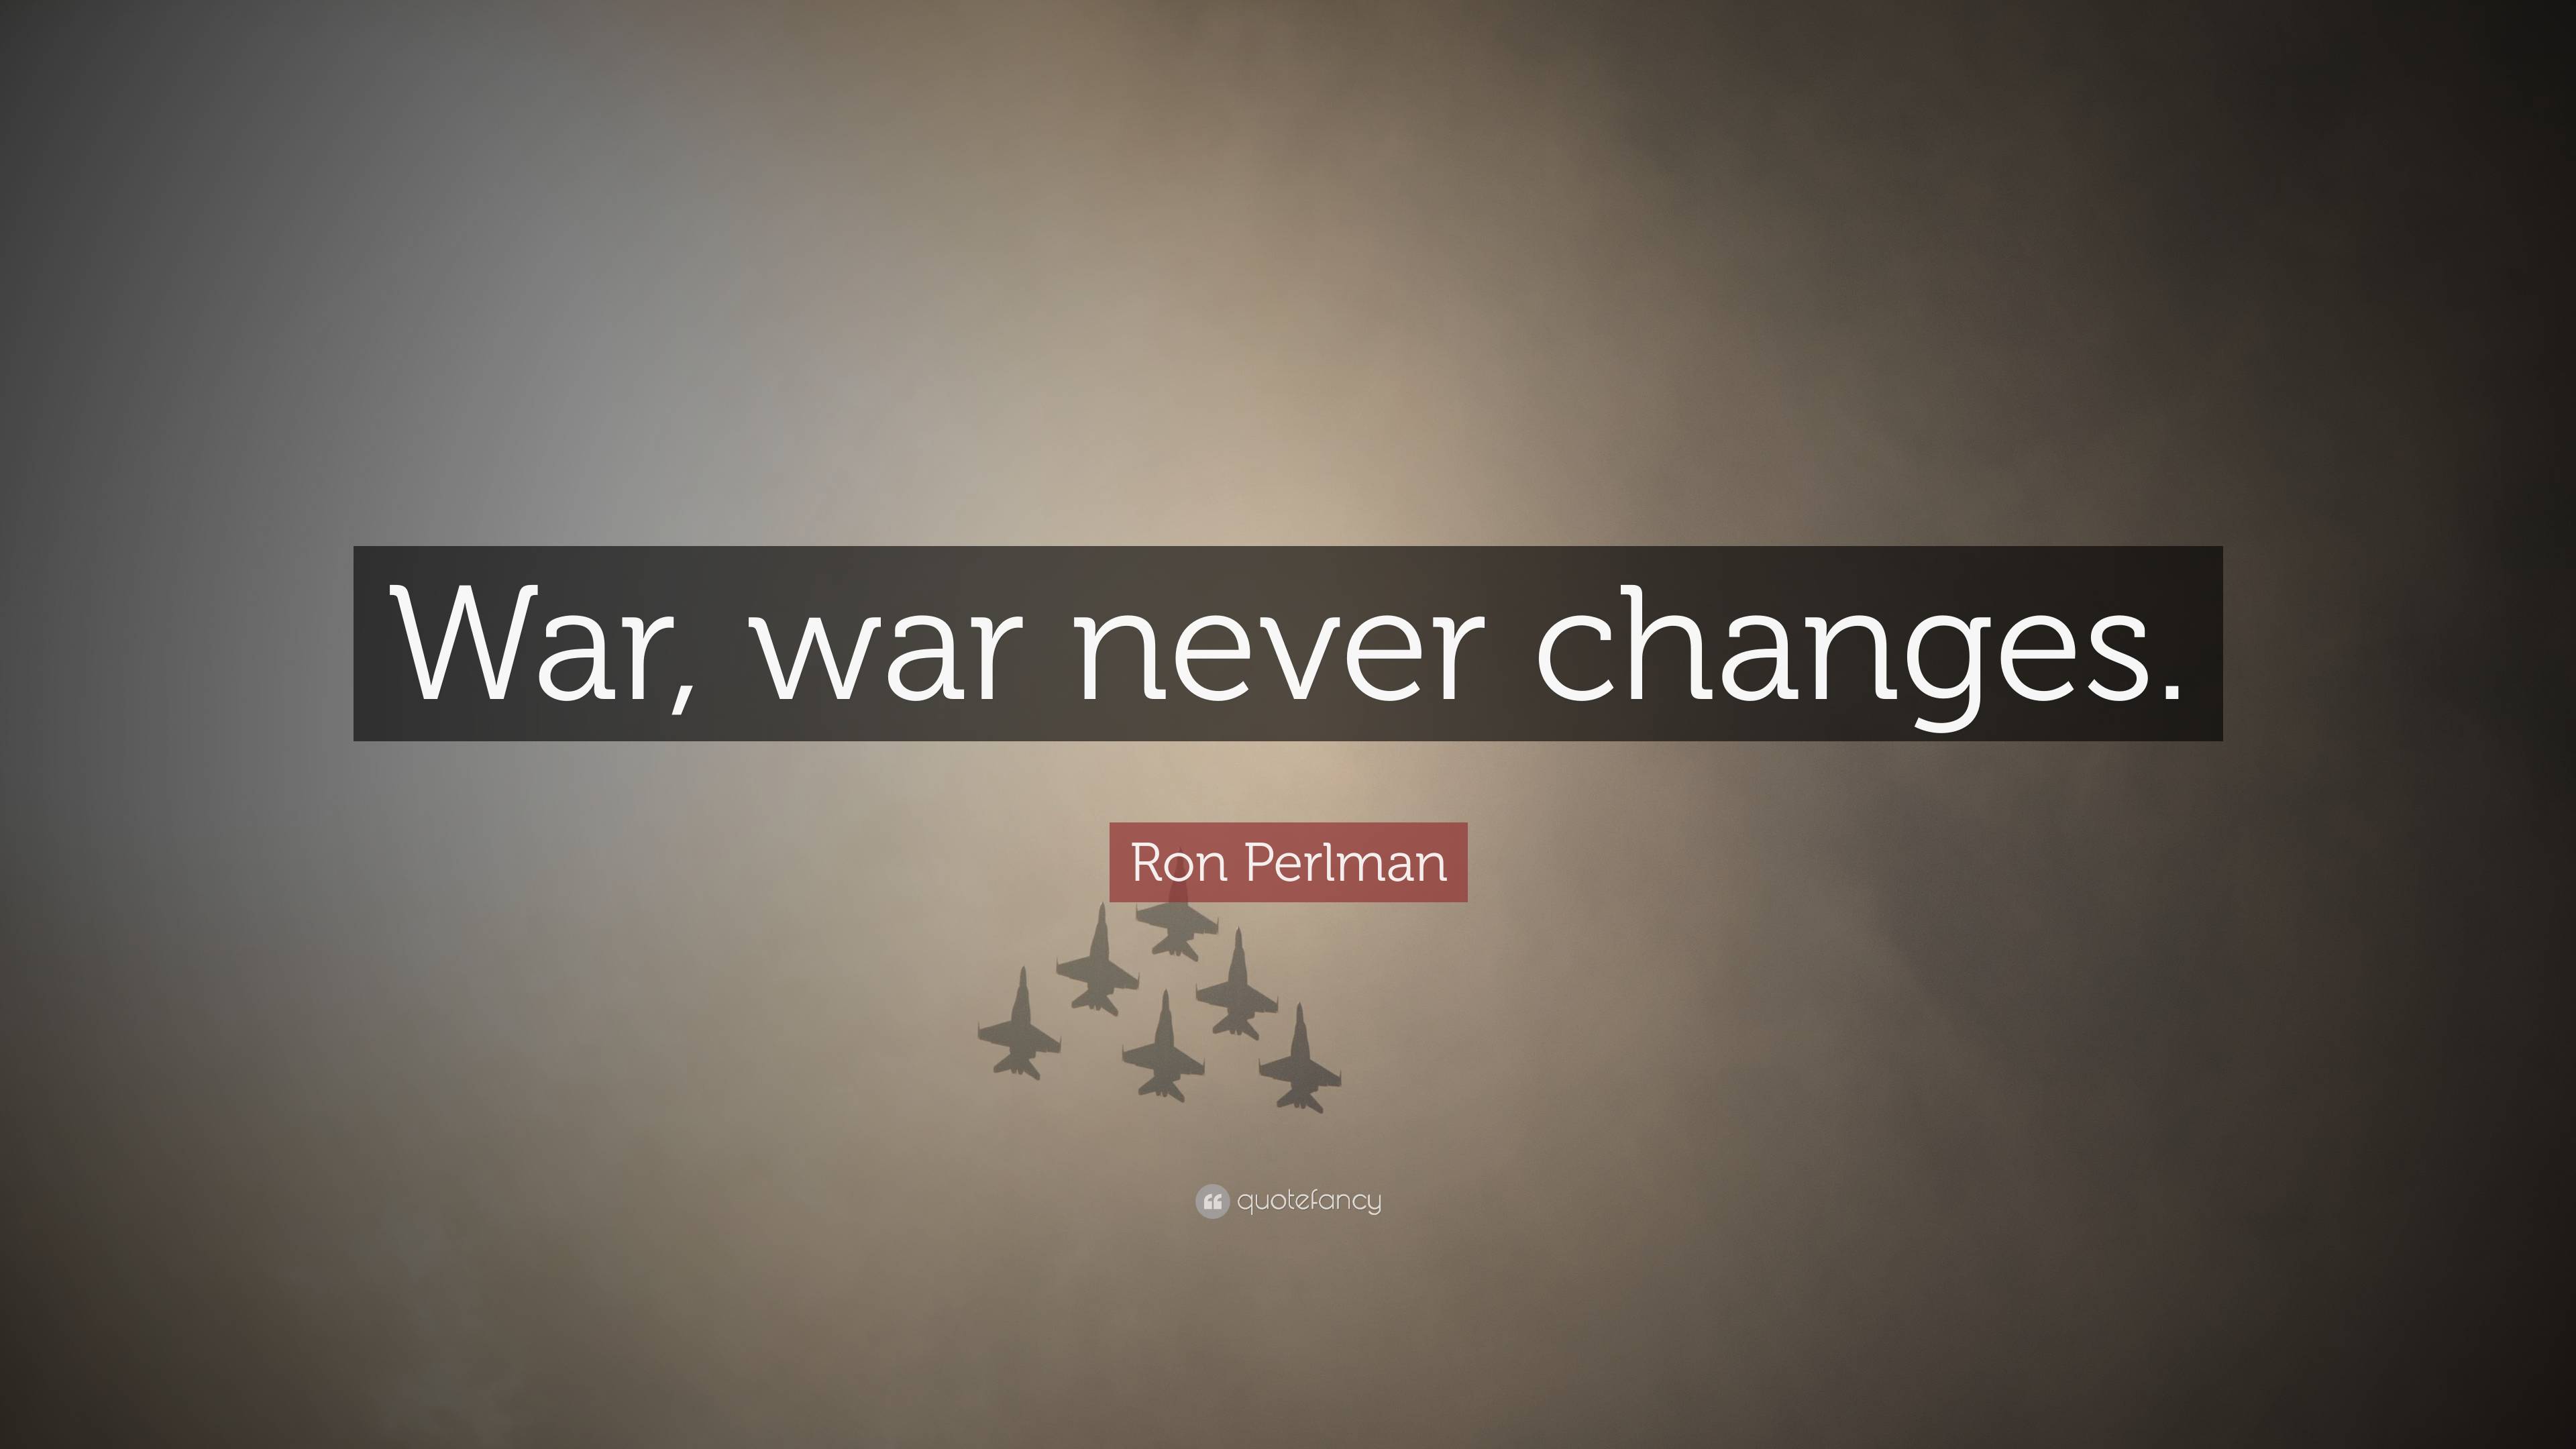 Ron Perlman Quote: “War, war never changes.”